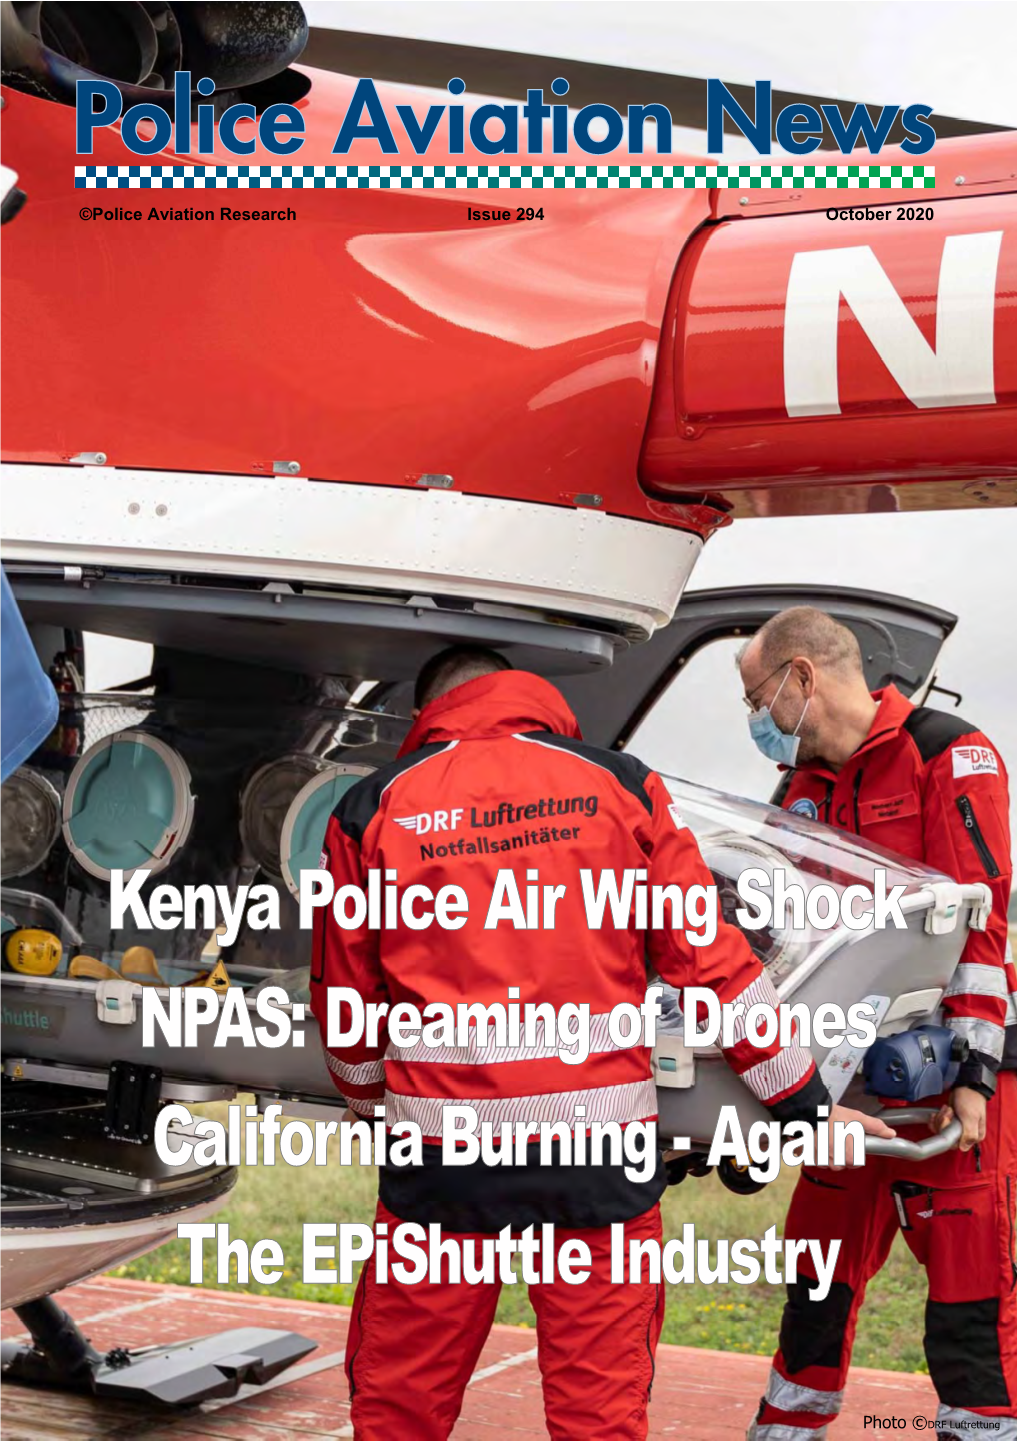 Police Aviation News October 2020 1 # ©Police Aviation Research Issue